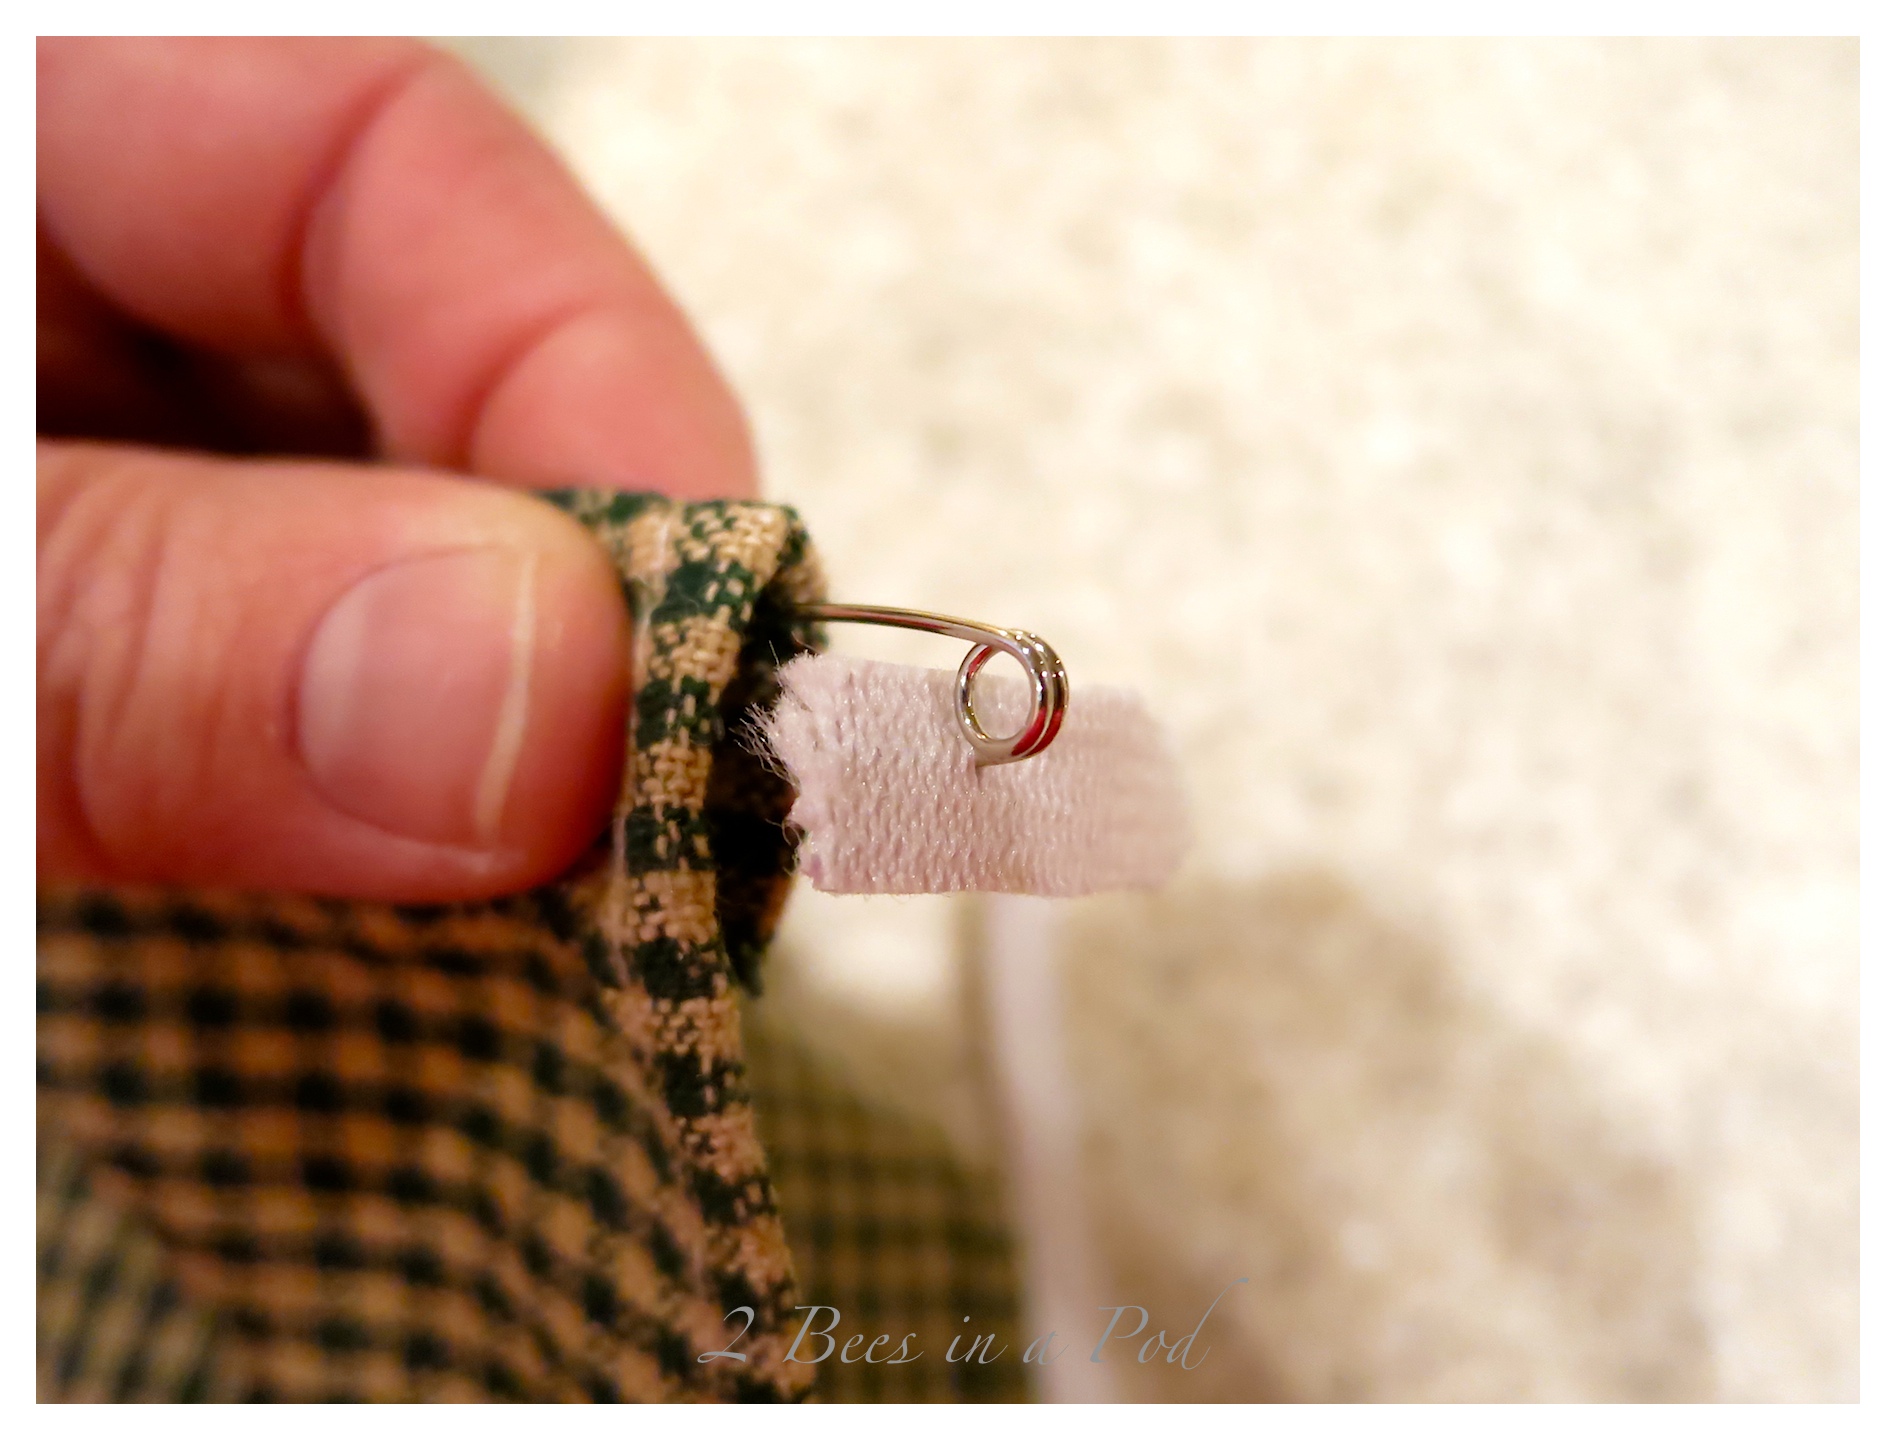 Easy to sew Christmas dog collars for your favorite pet. Would be a great gift for anyone with a dog :)